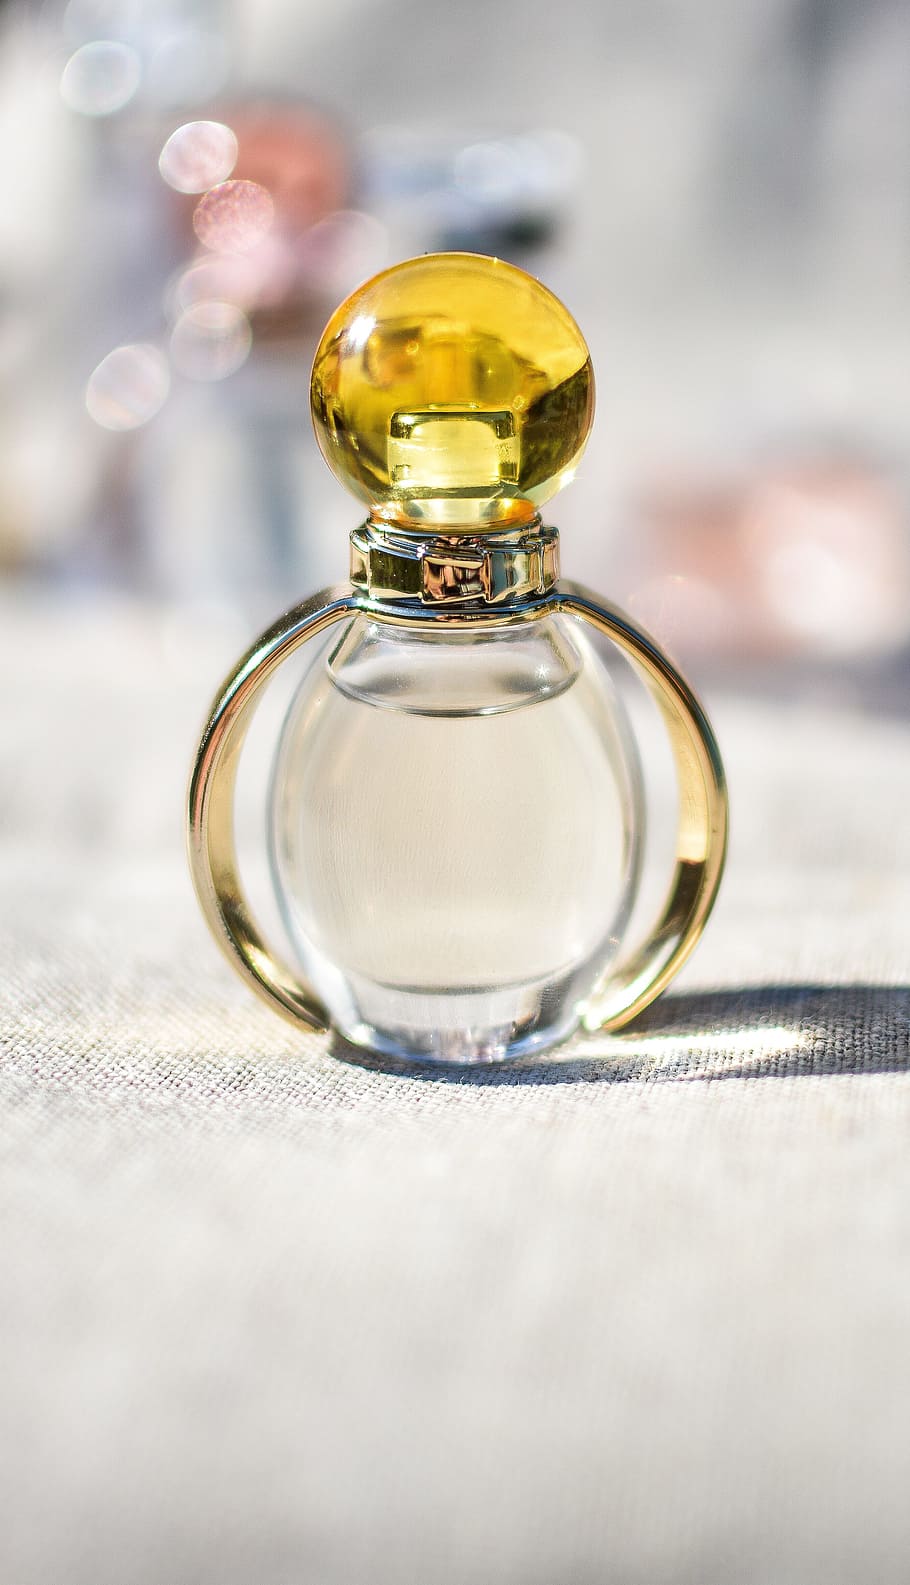 Hd Wallpaper Yellow Glass Perfume Bottle Scent Aroma Smell Fragrance Spray Wallpaper Flare